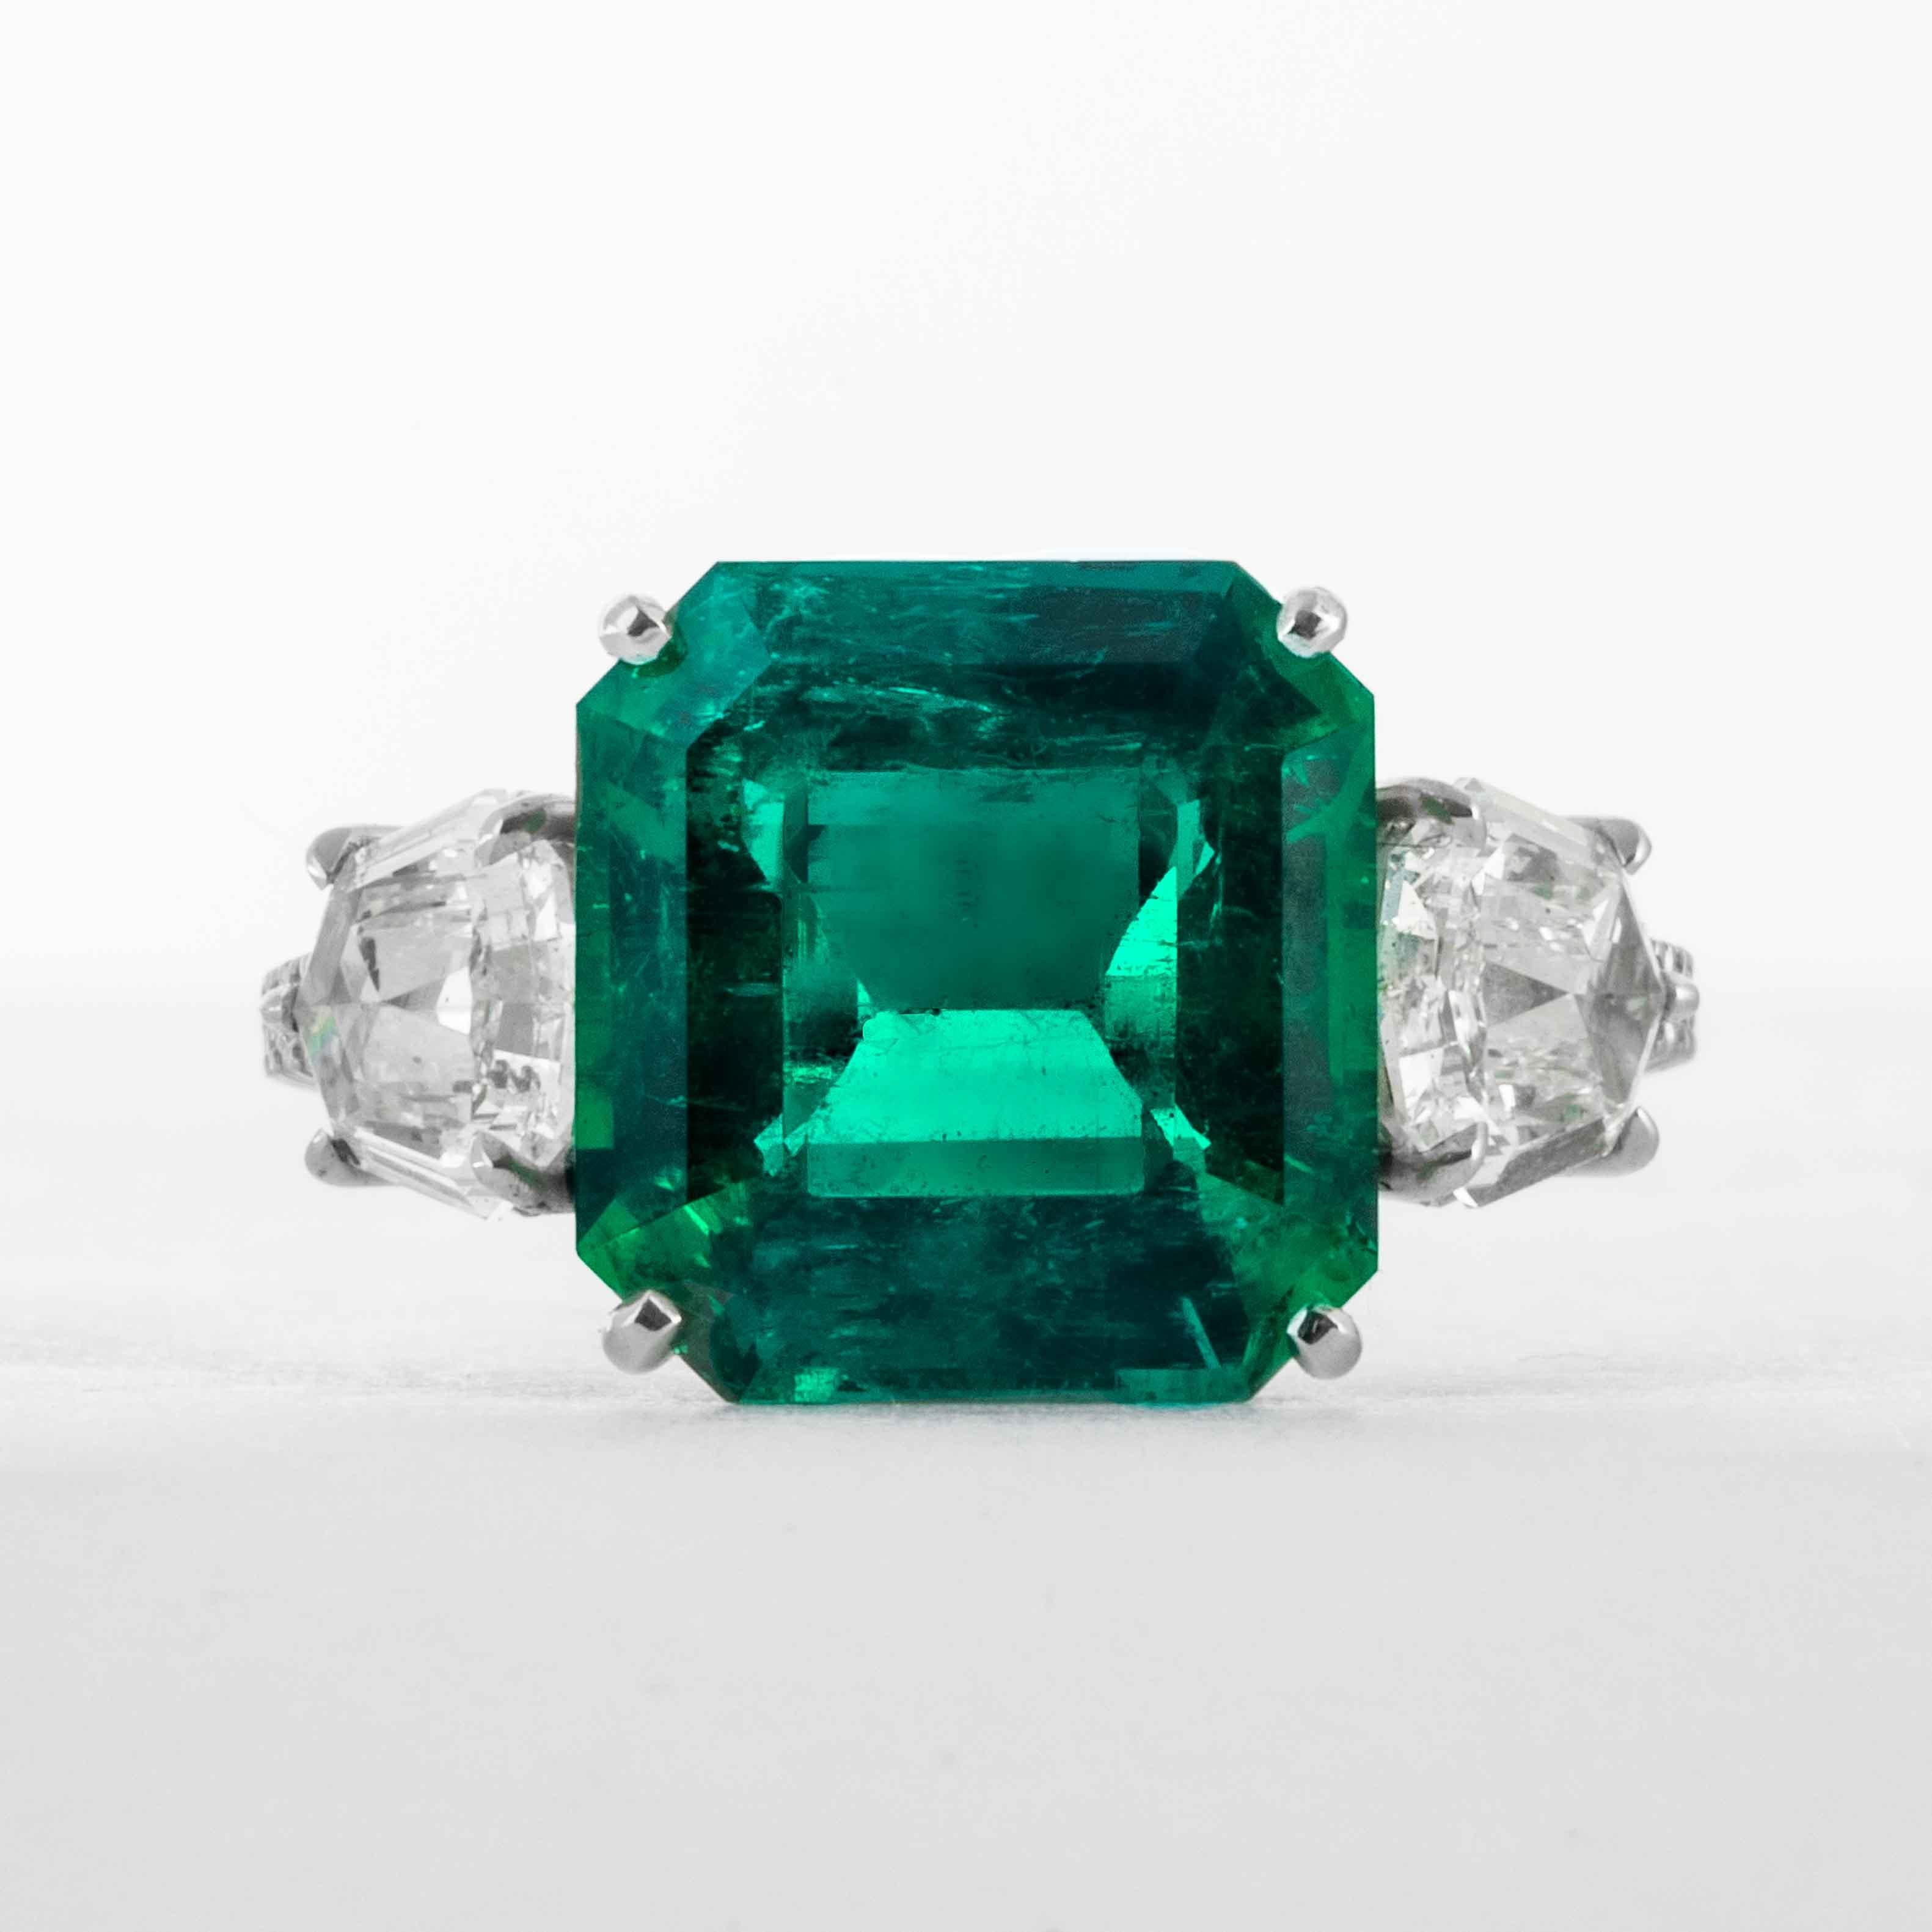 This emerald ring is offered by Shreve, Crump & Low. This green emerald cut emerald is custom set in a handcrafted Shreve, Crump & Low one-of-kind platinum ring, consisting of 1 Colombian green emerald cut emerald weighing 5.48 carats.  This 5.48